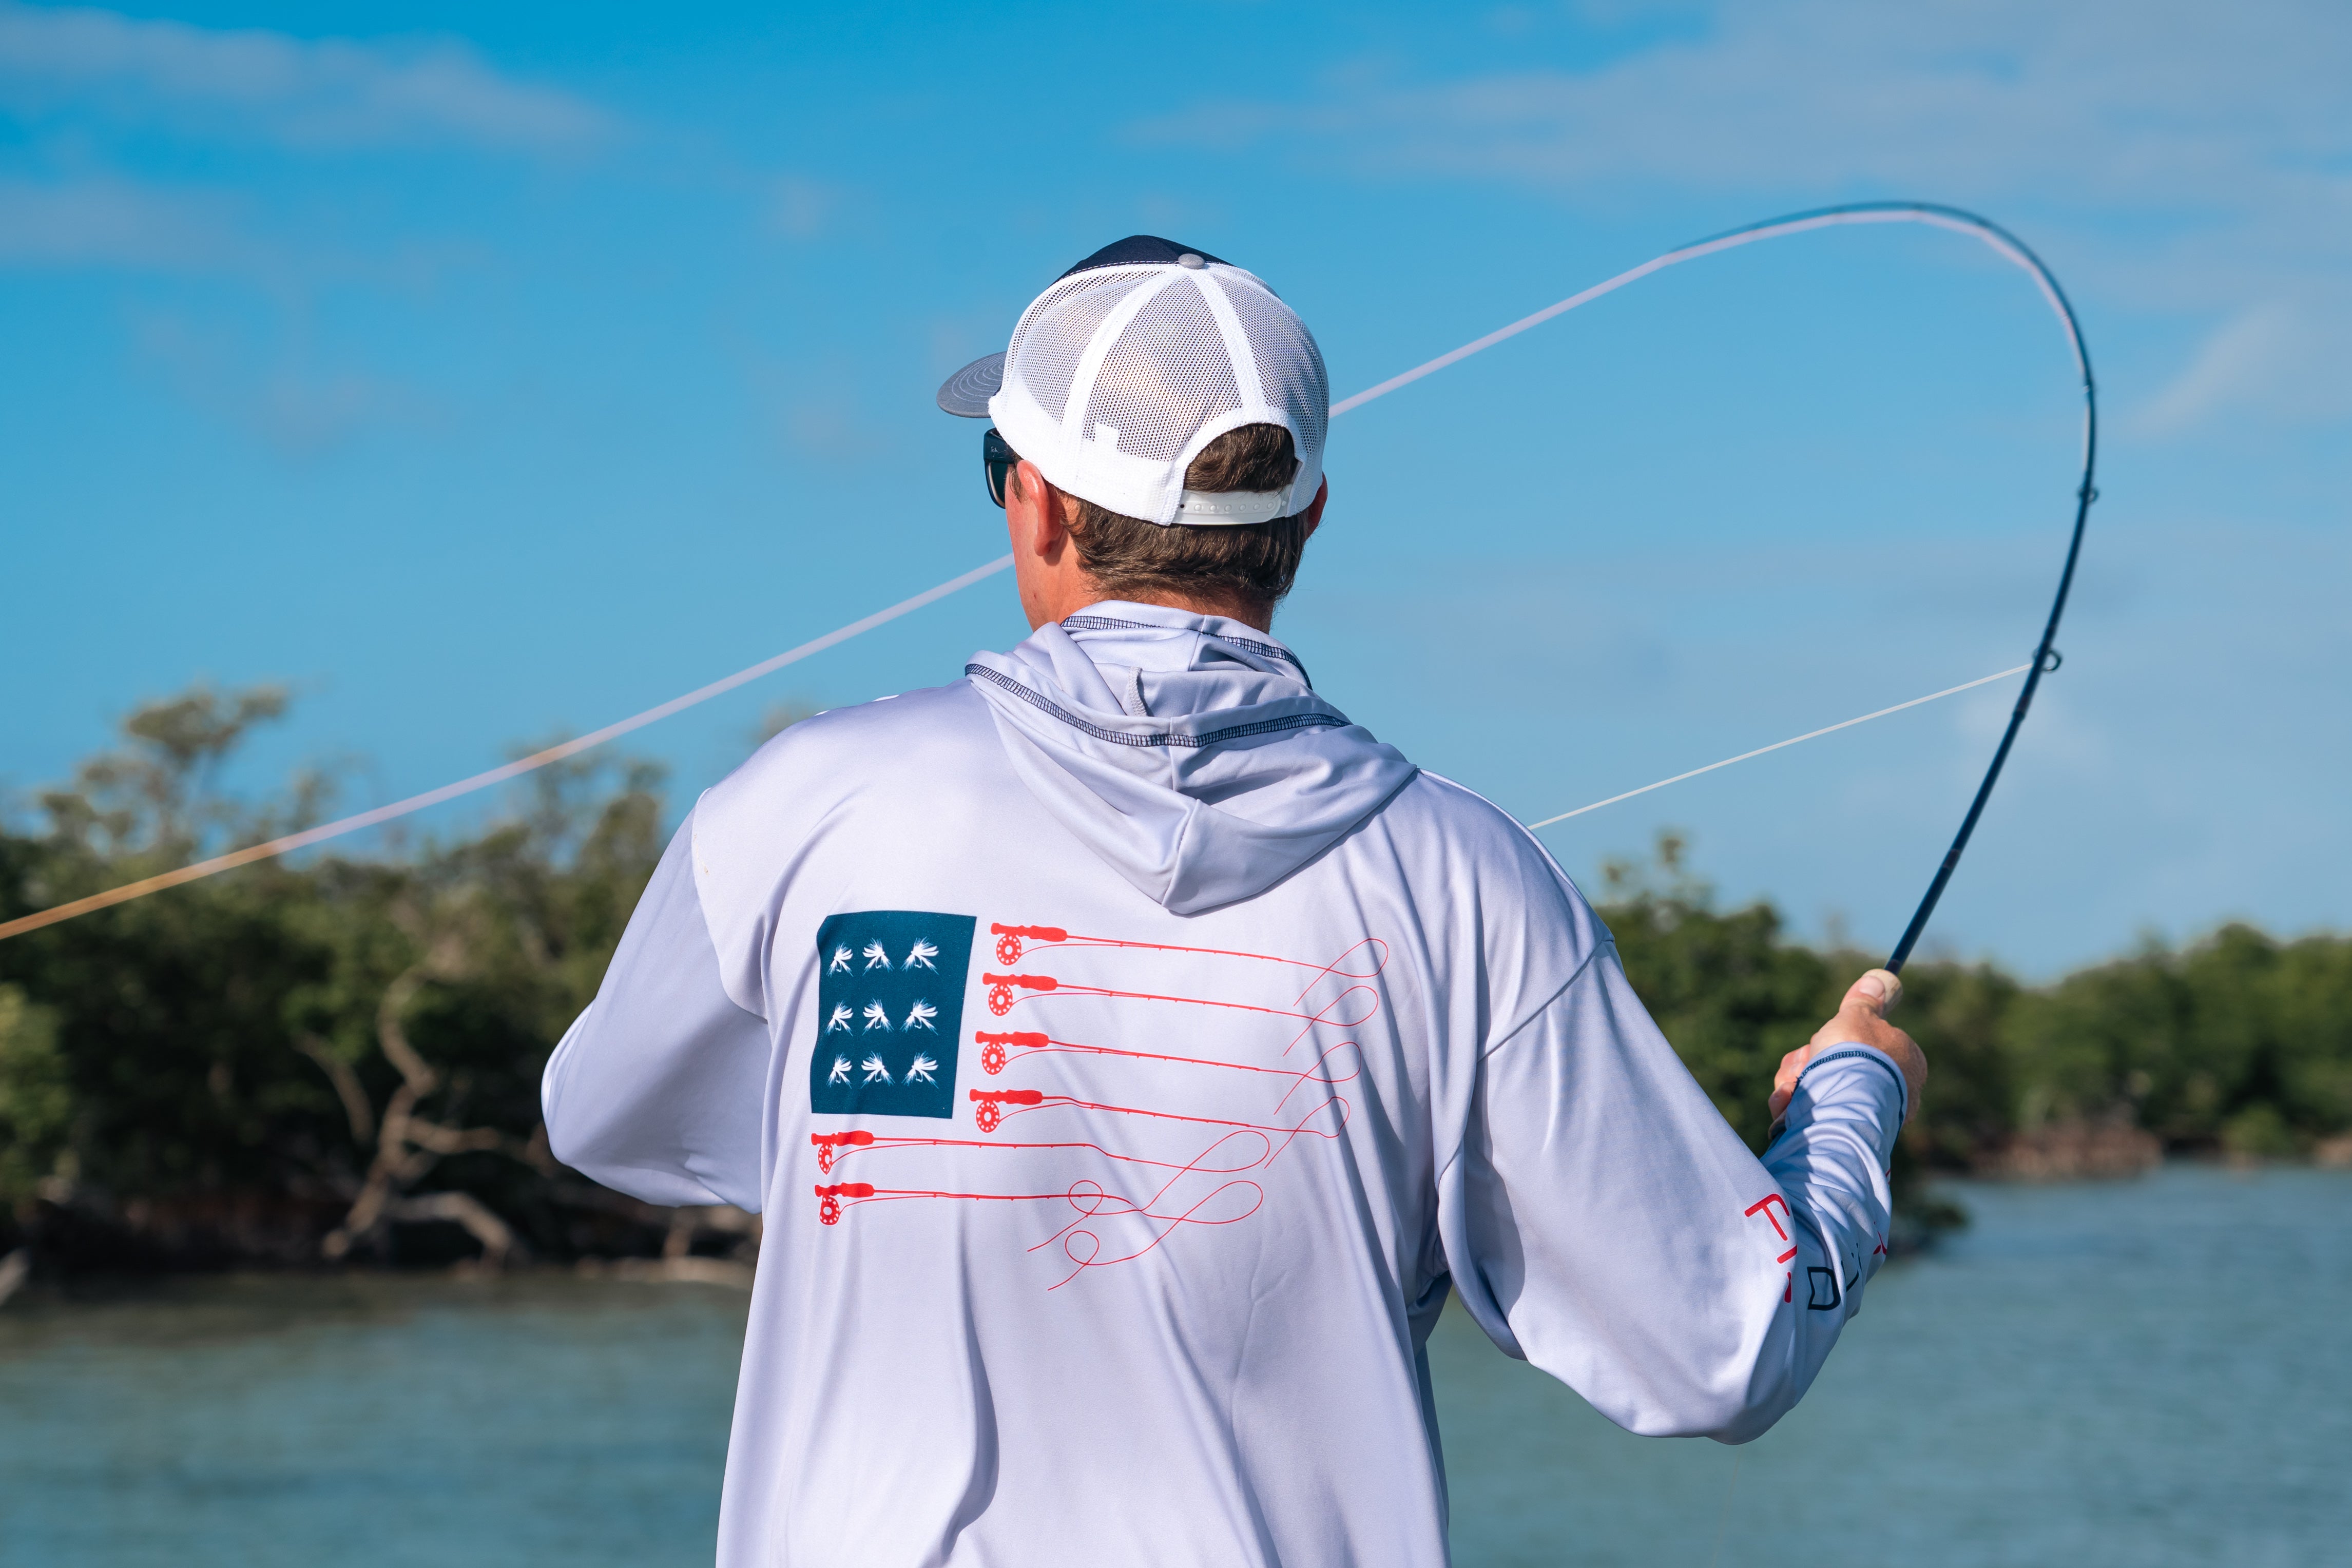 Pon my soul: Fly fishing for whopping tarpon in the Florida Keys - Fish &  Fly